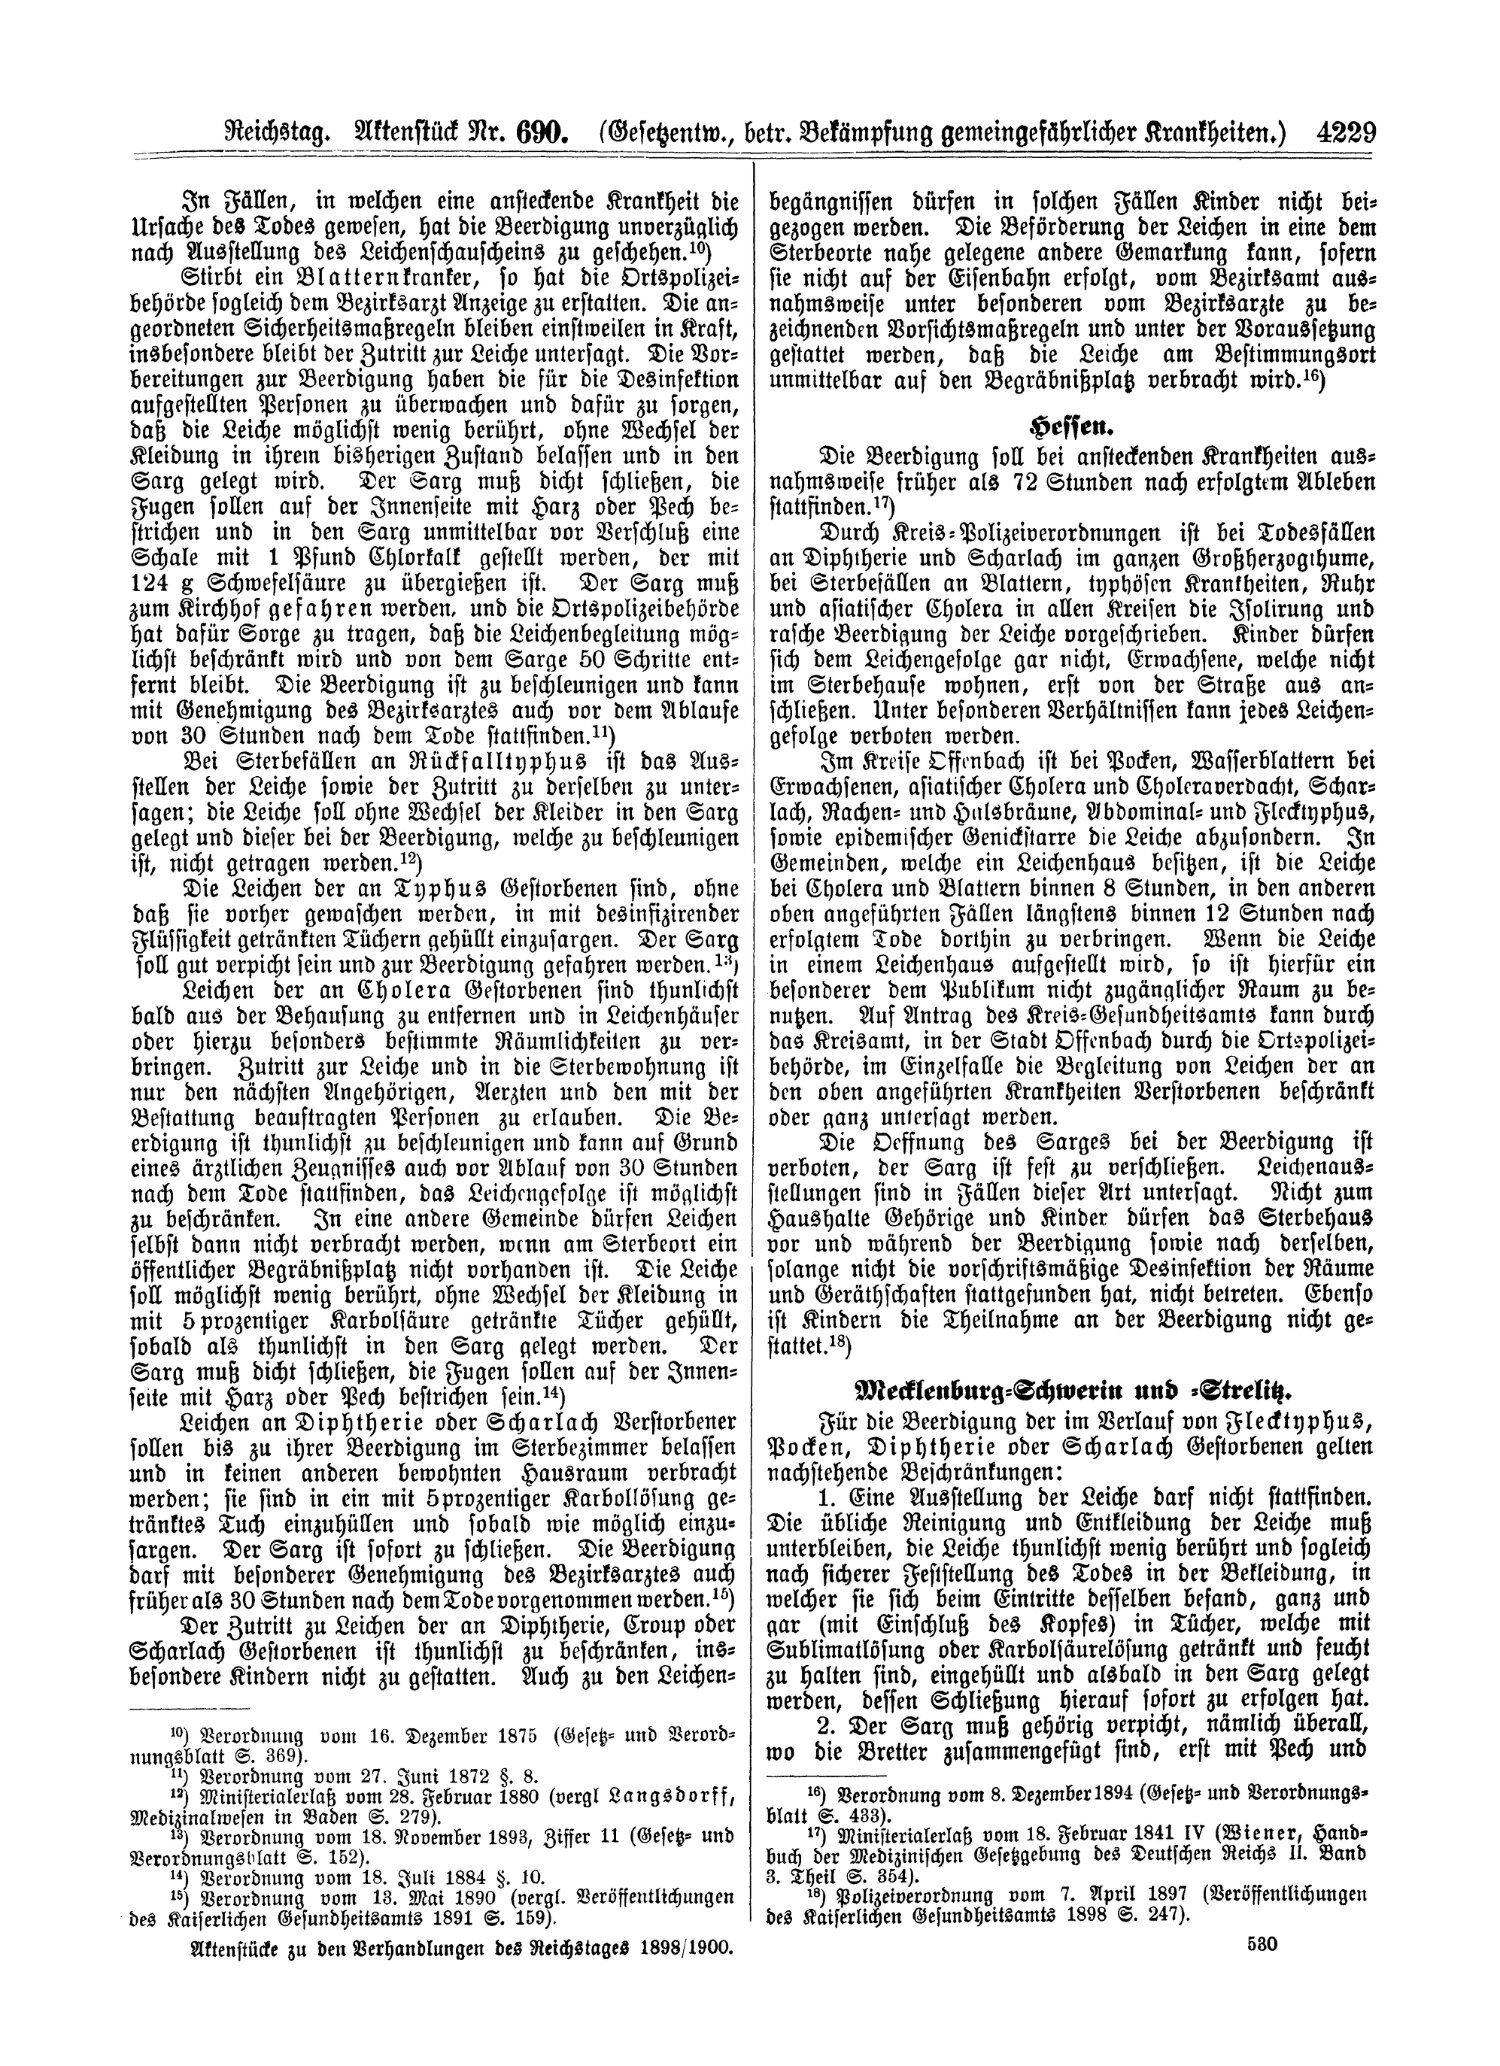 Scan of page 4229